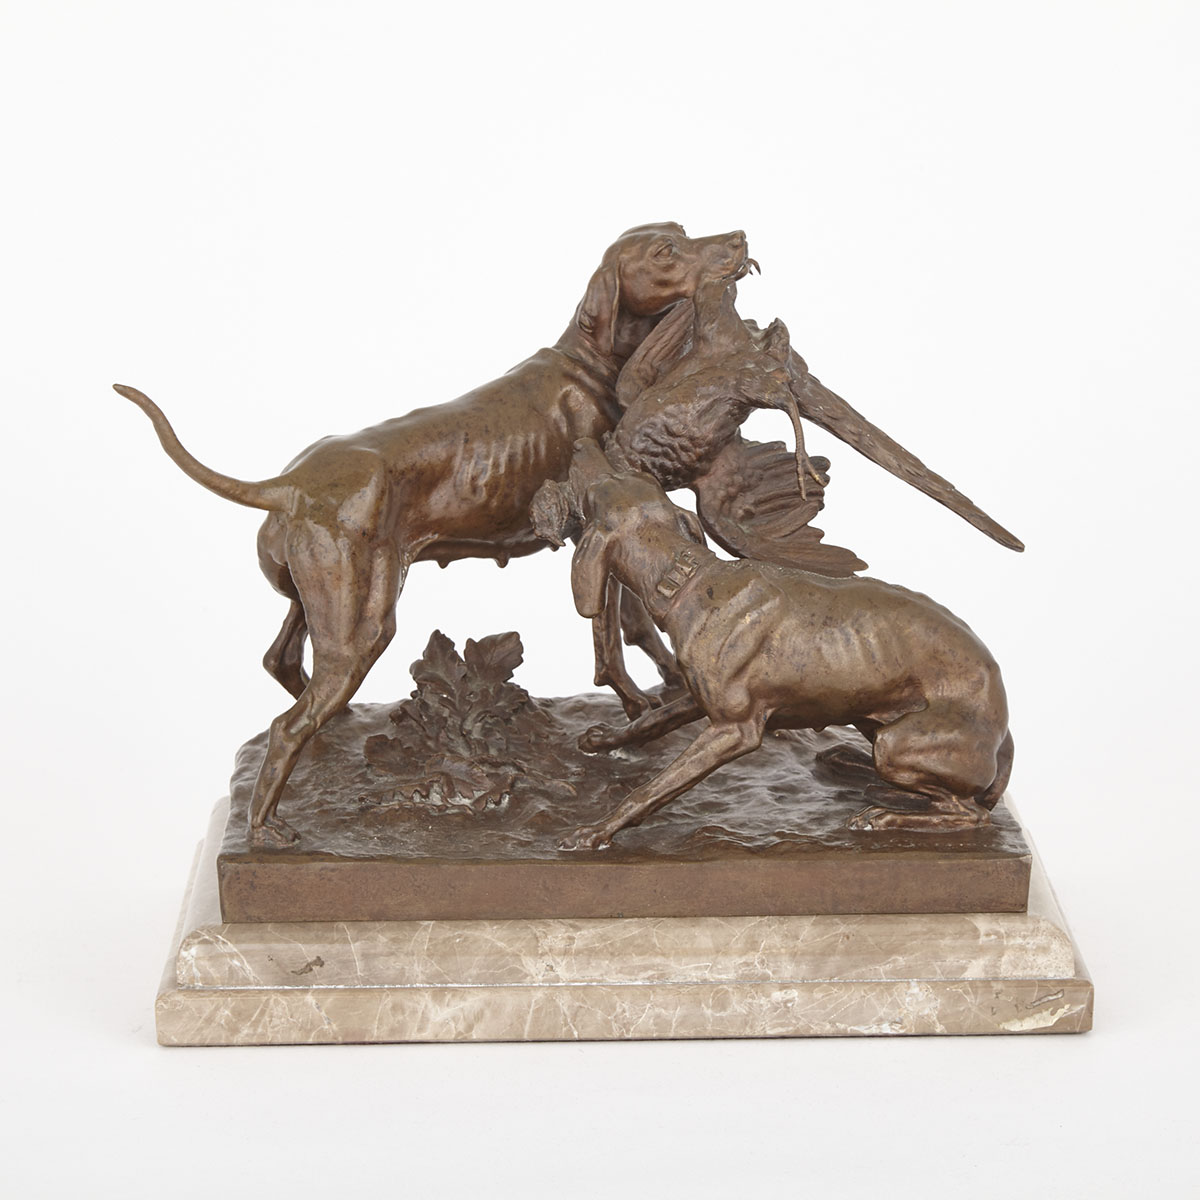 A French Bronze Hunting Group of Two Hounds and a Pheasant by Louis François Georges Comte de Ferrieres (1837-1907), early 20th century